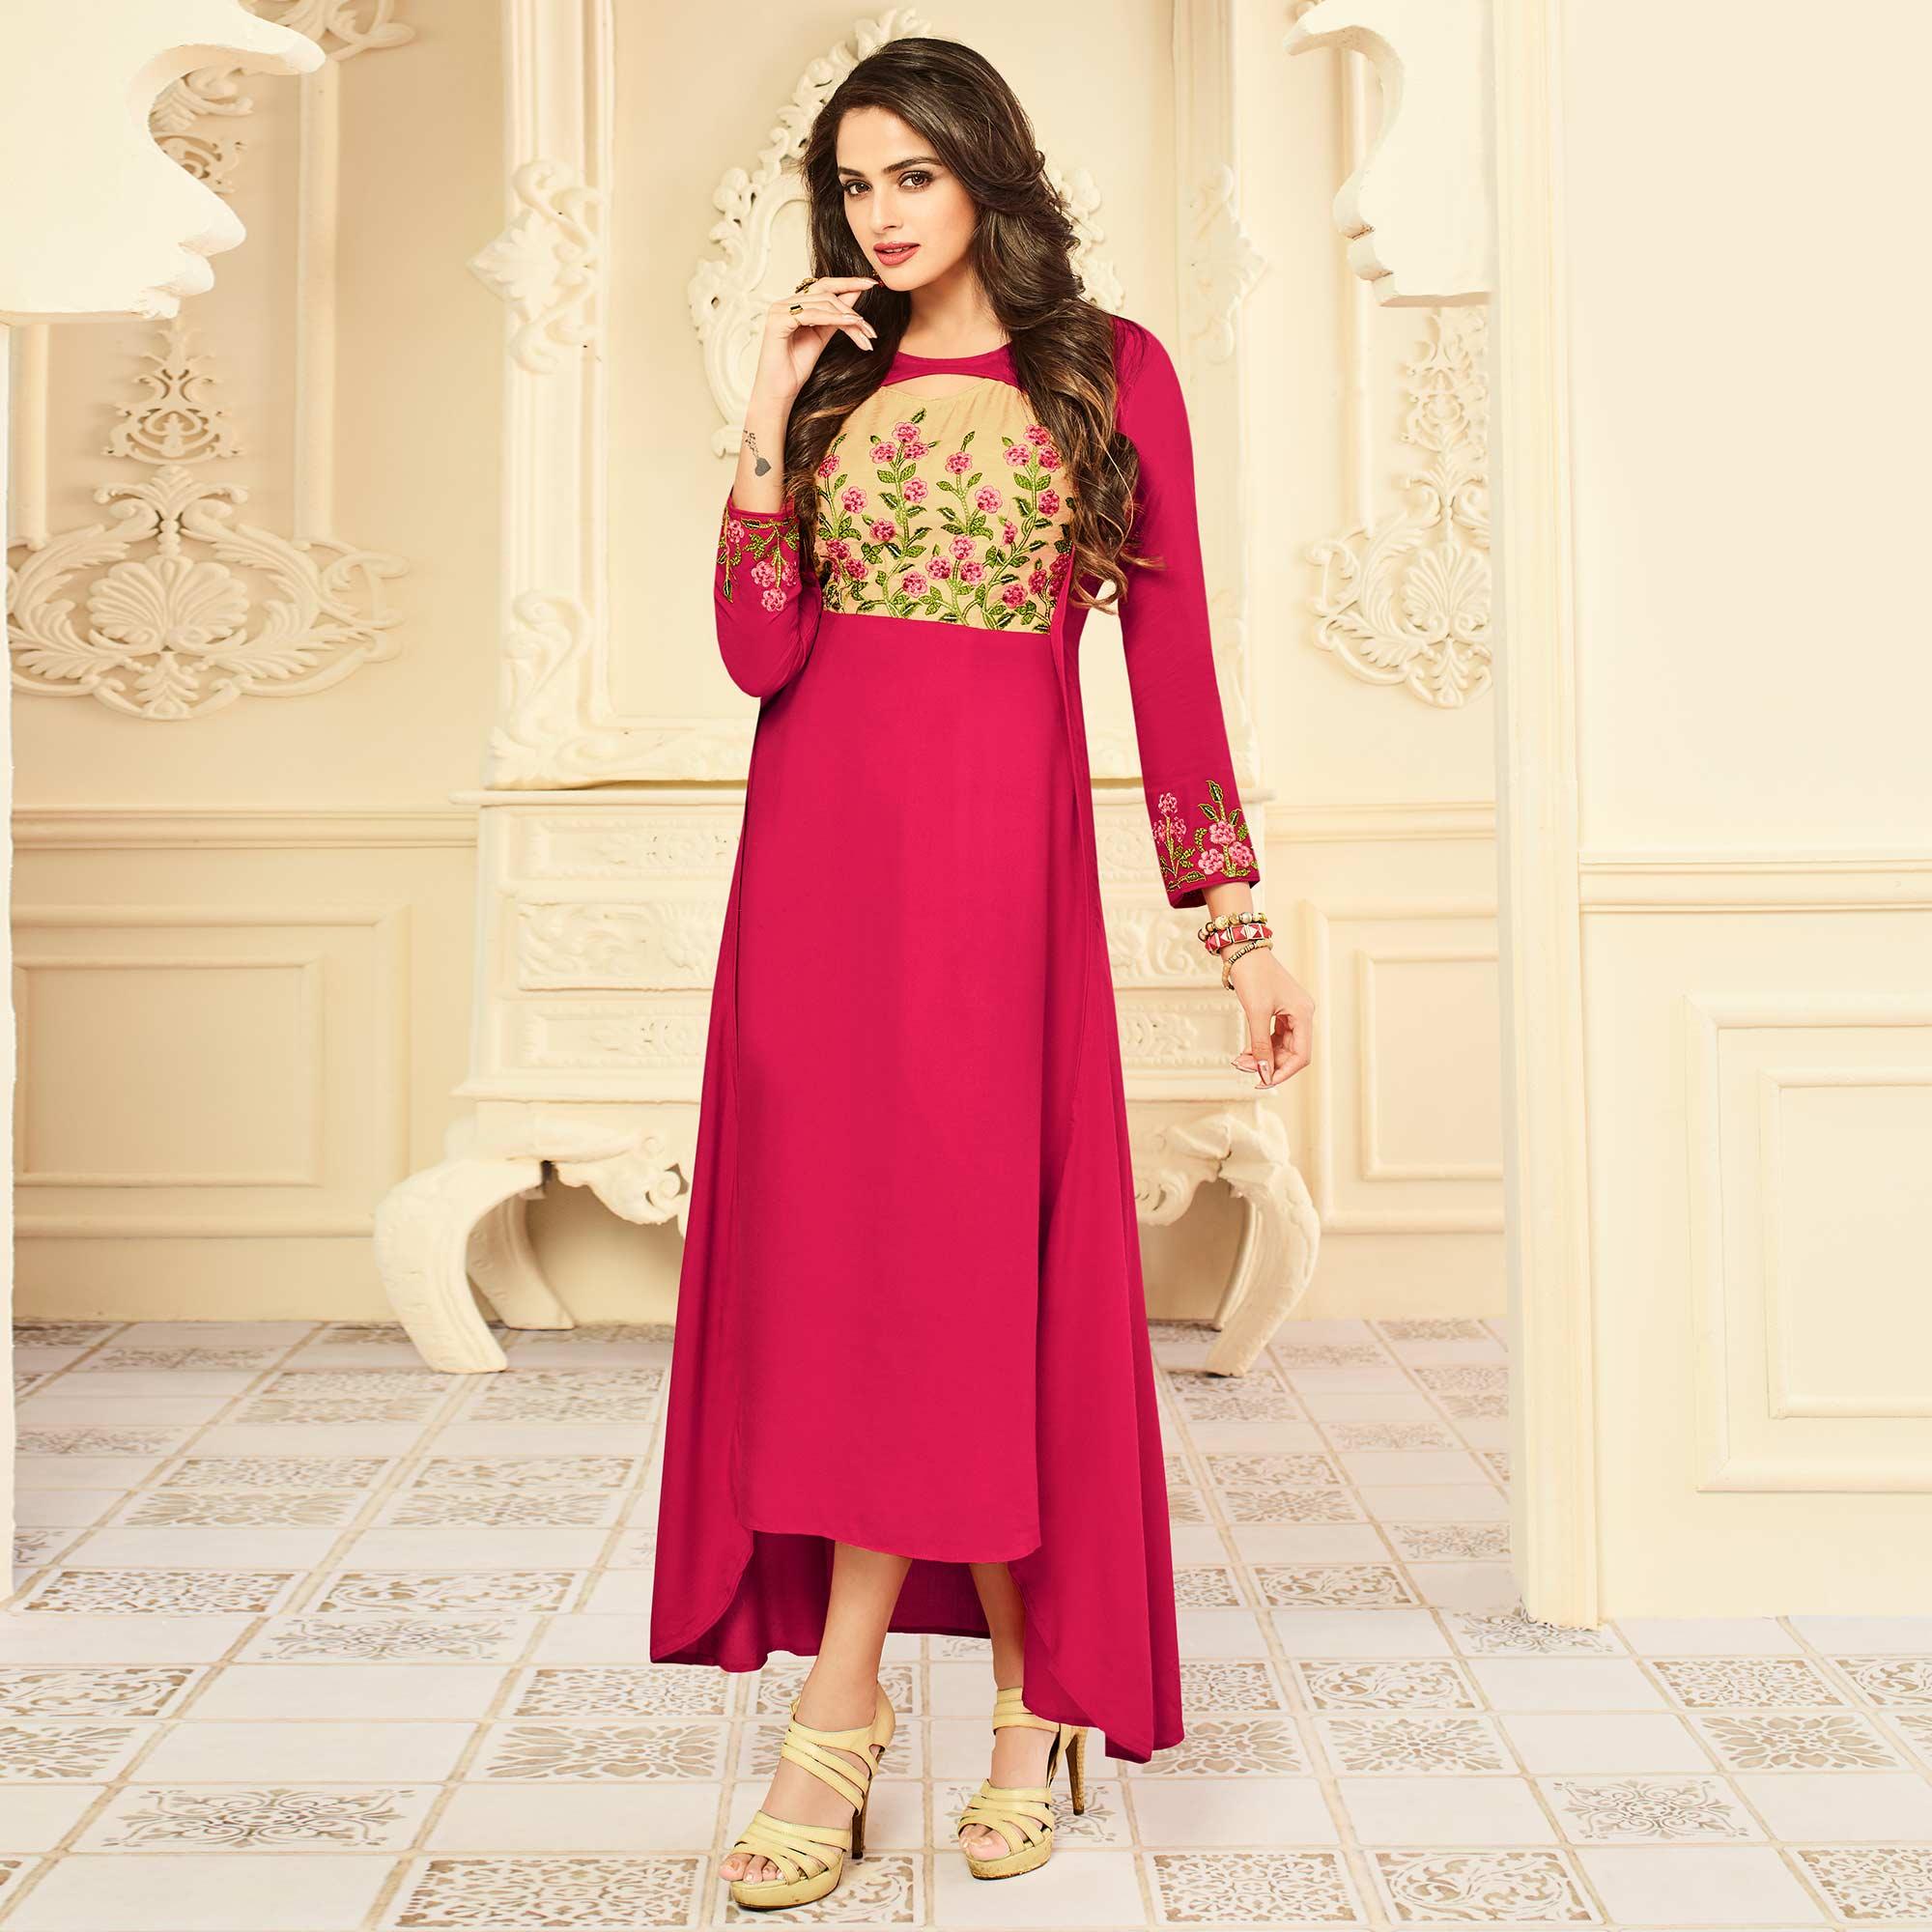 Groovy Pink Colored Party Wear Floral Embroidered Rayon Kurti - Peachmode